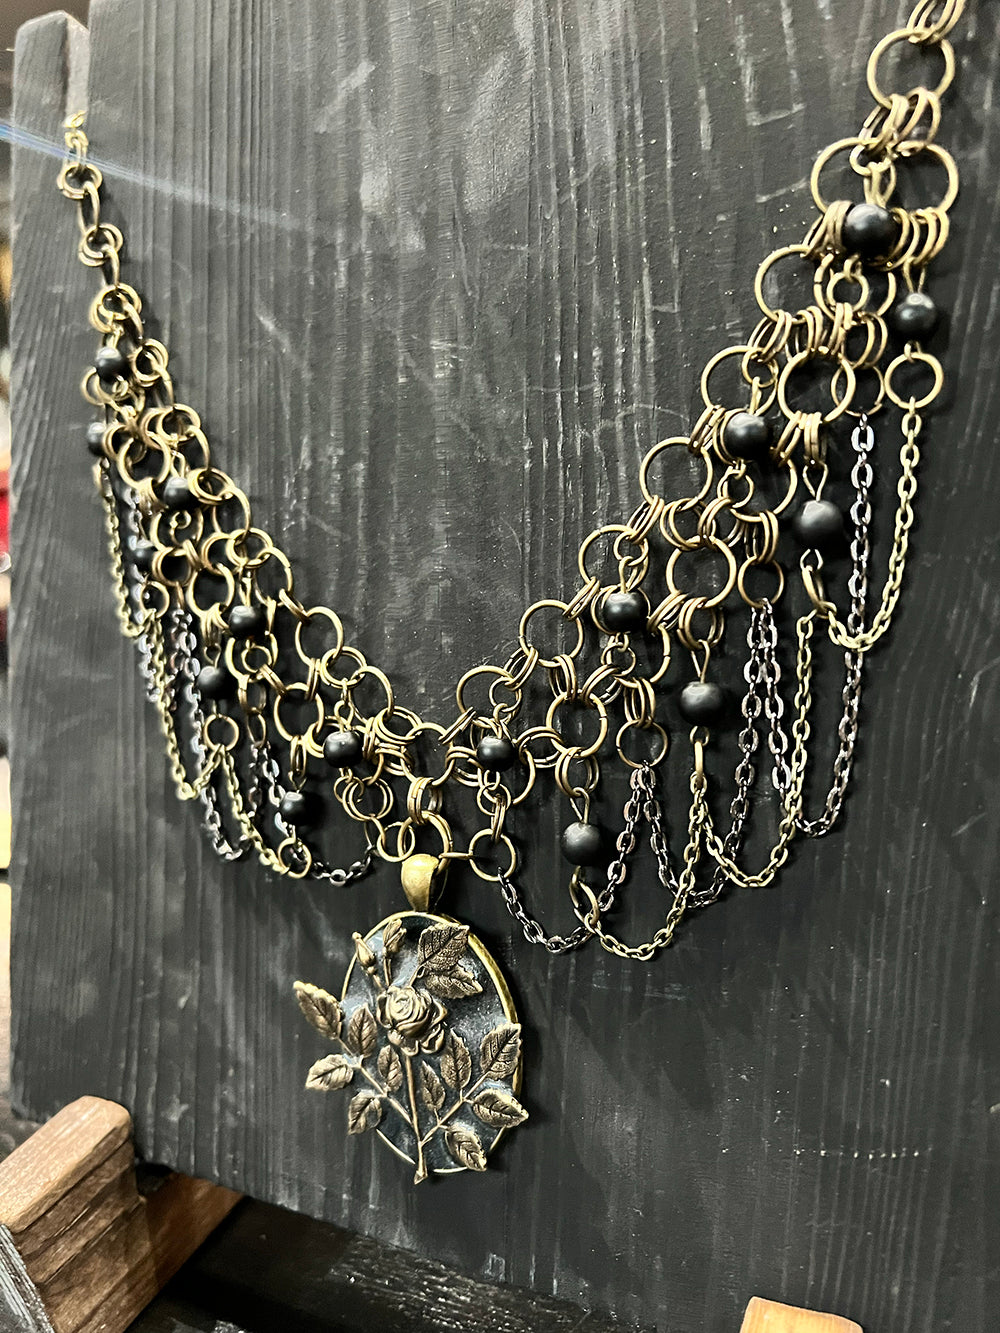 Alexandra Rumsey (Hekas Creative) Bronze and Gunmetal Rose Pendant Chainmail Necklace